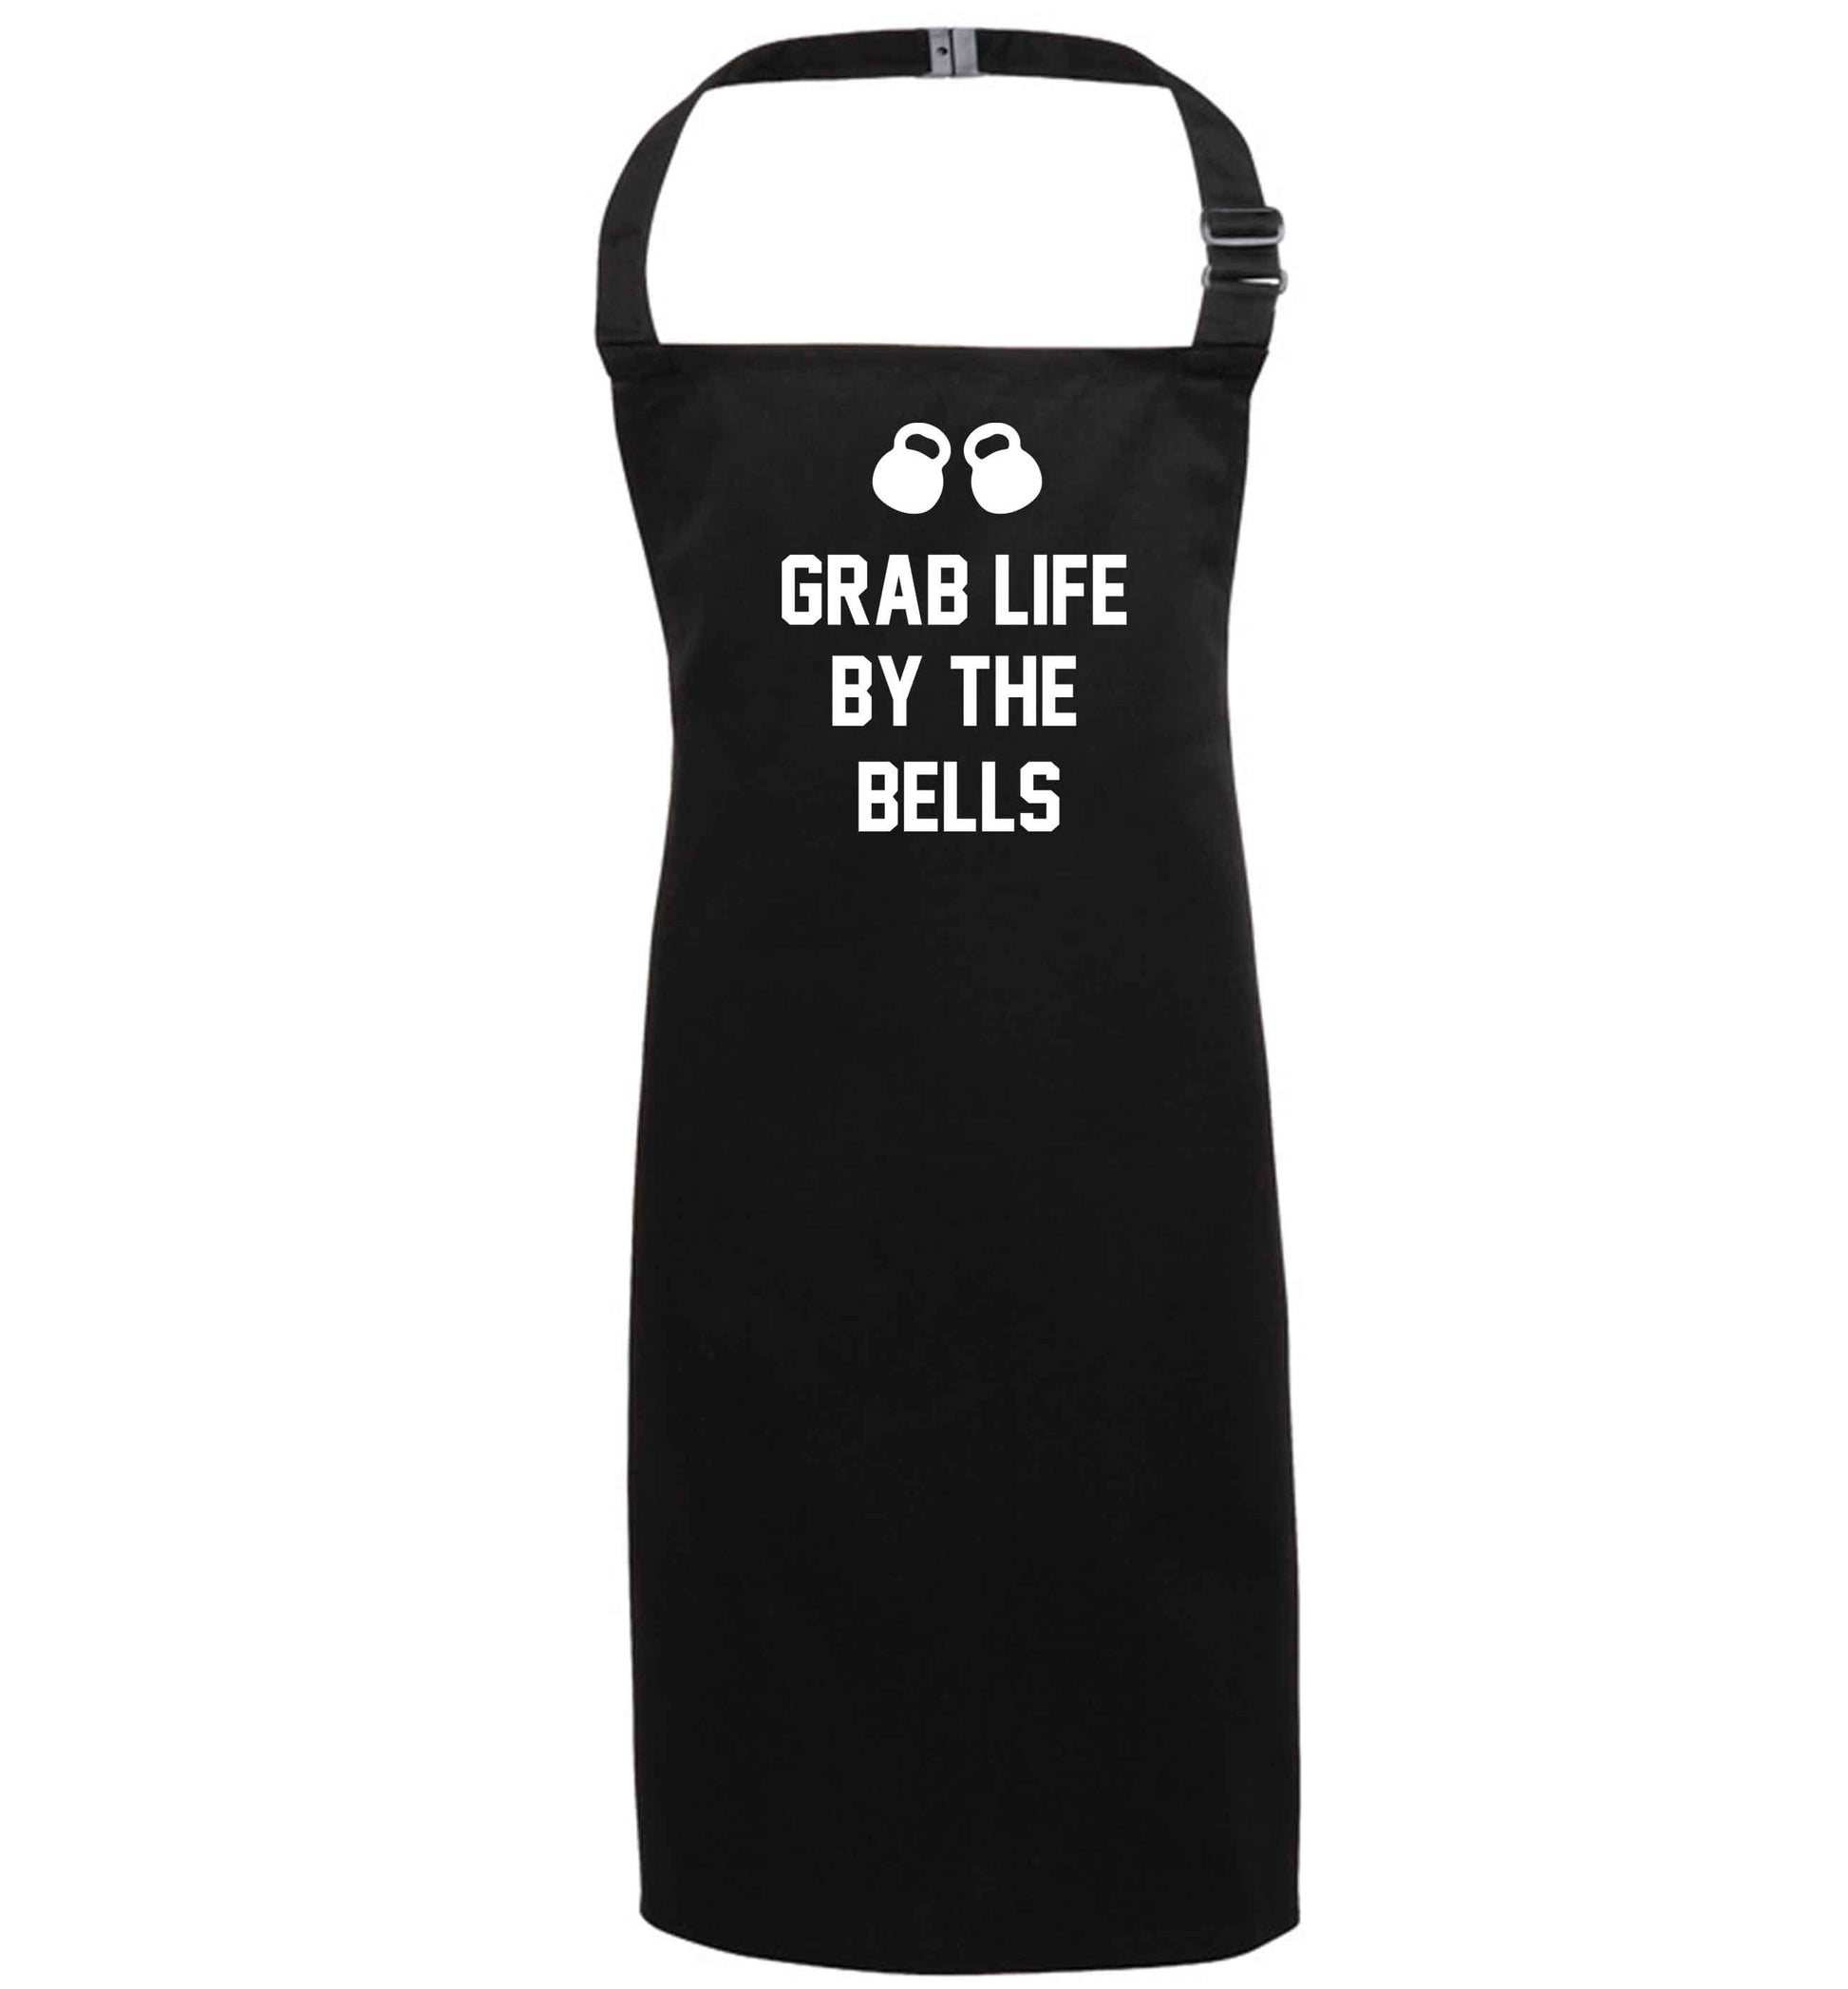 Grab life by the bells black apron 7-10 years